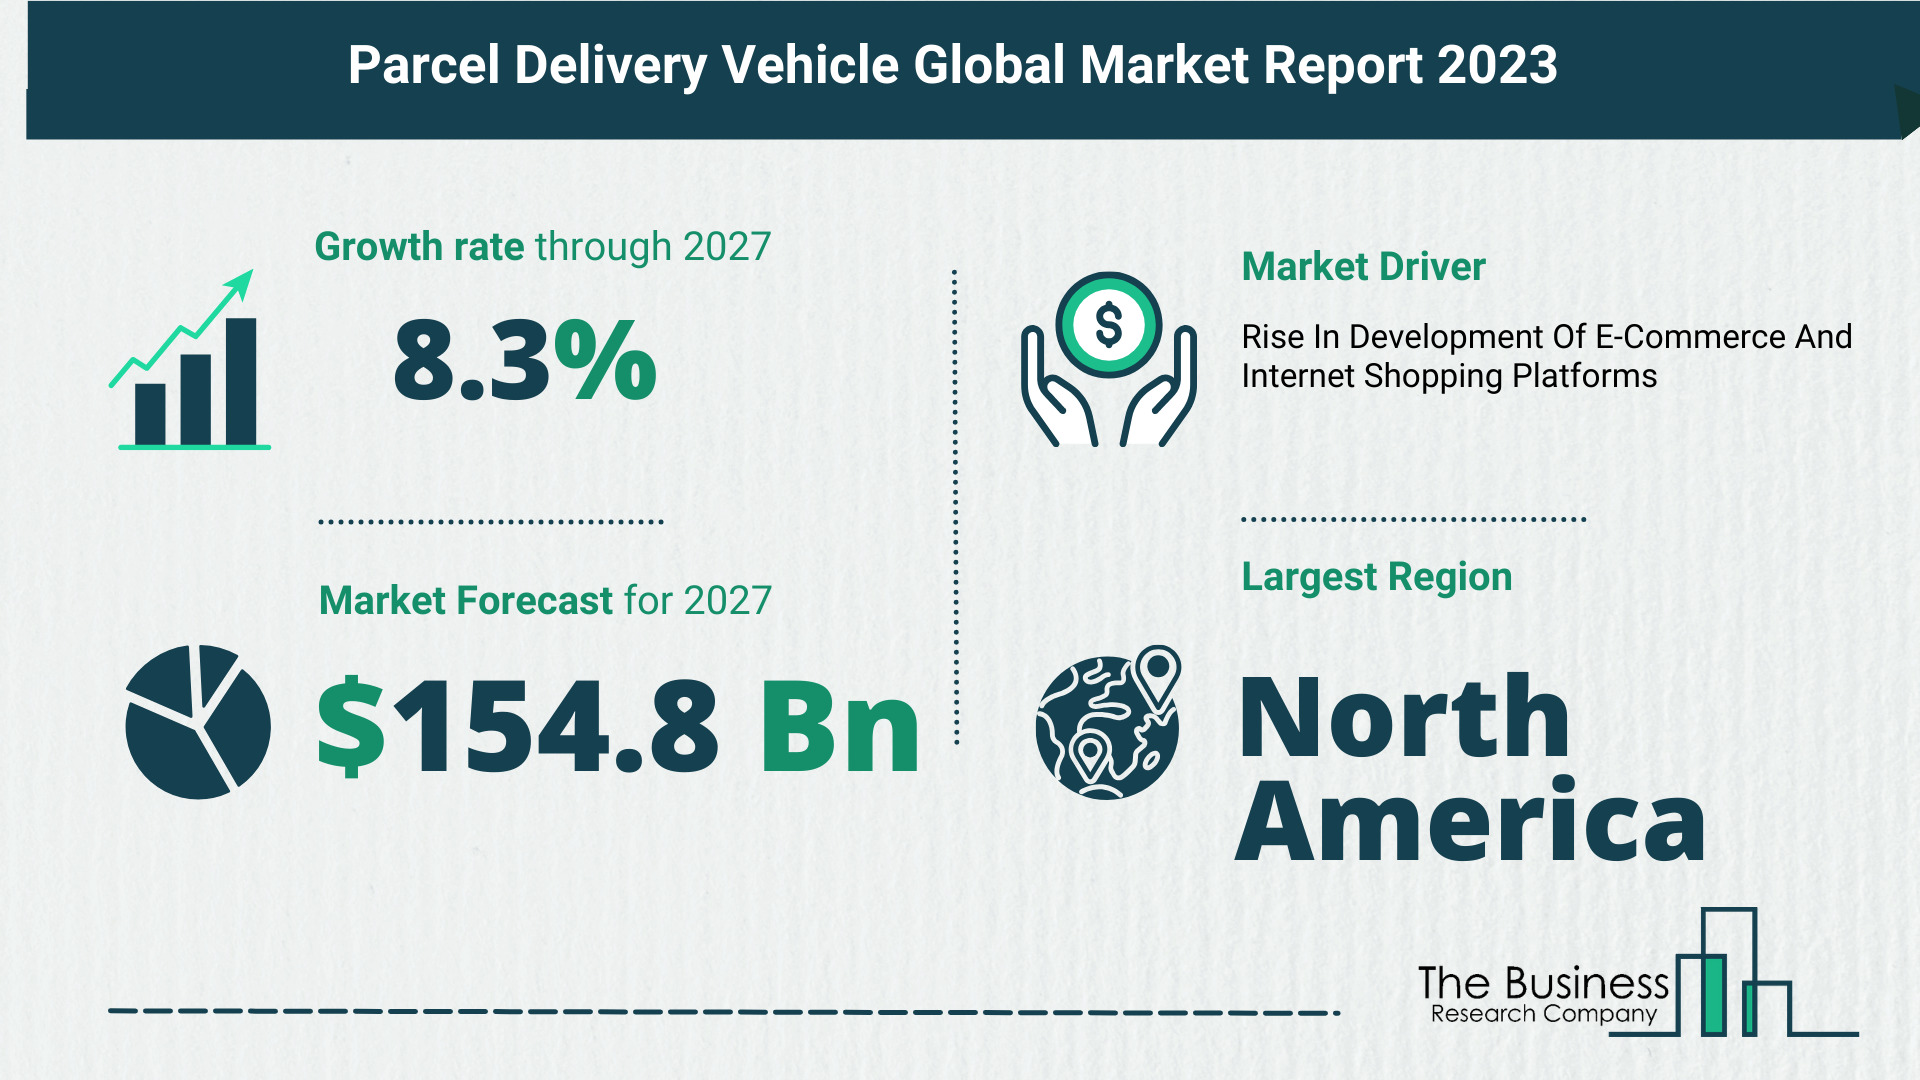 What Is The Forecast Growth Rate For The Parcel Delivery Vehicle Market?